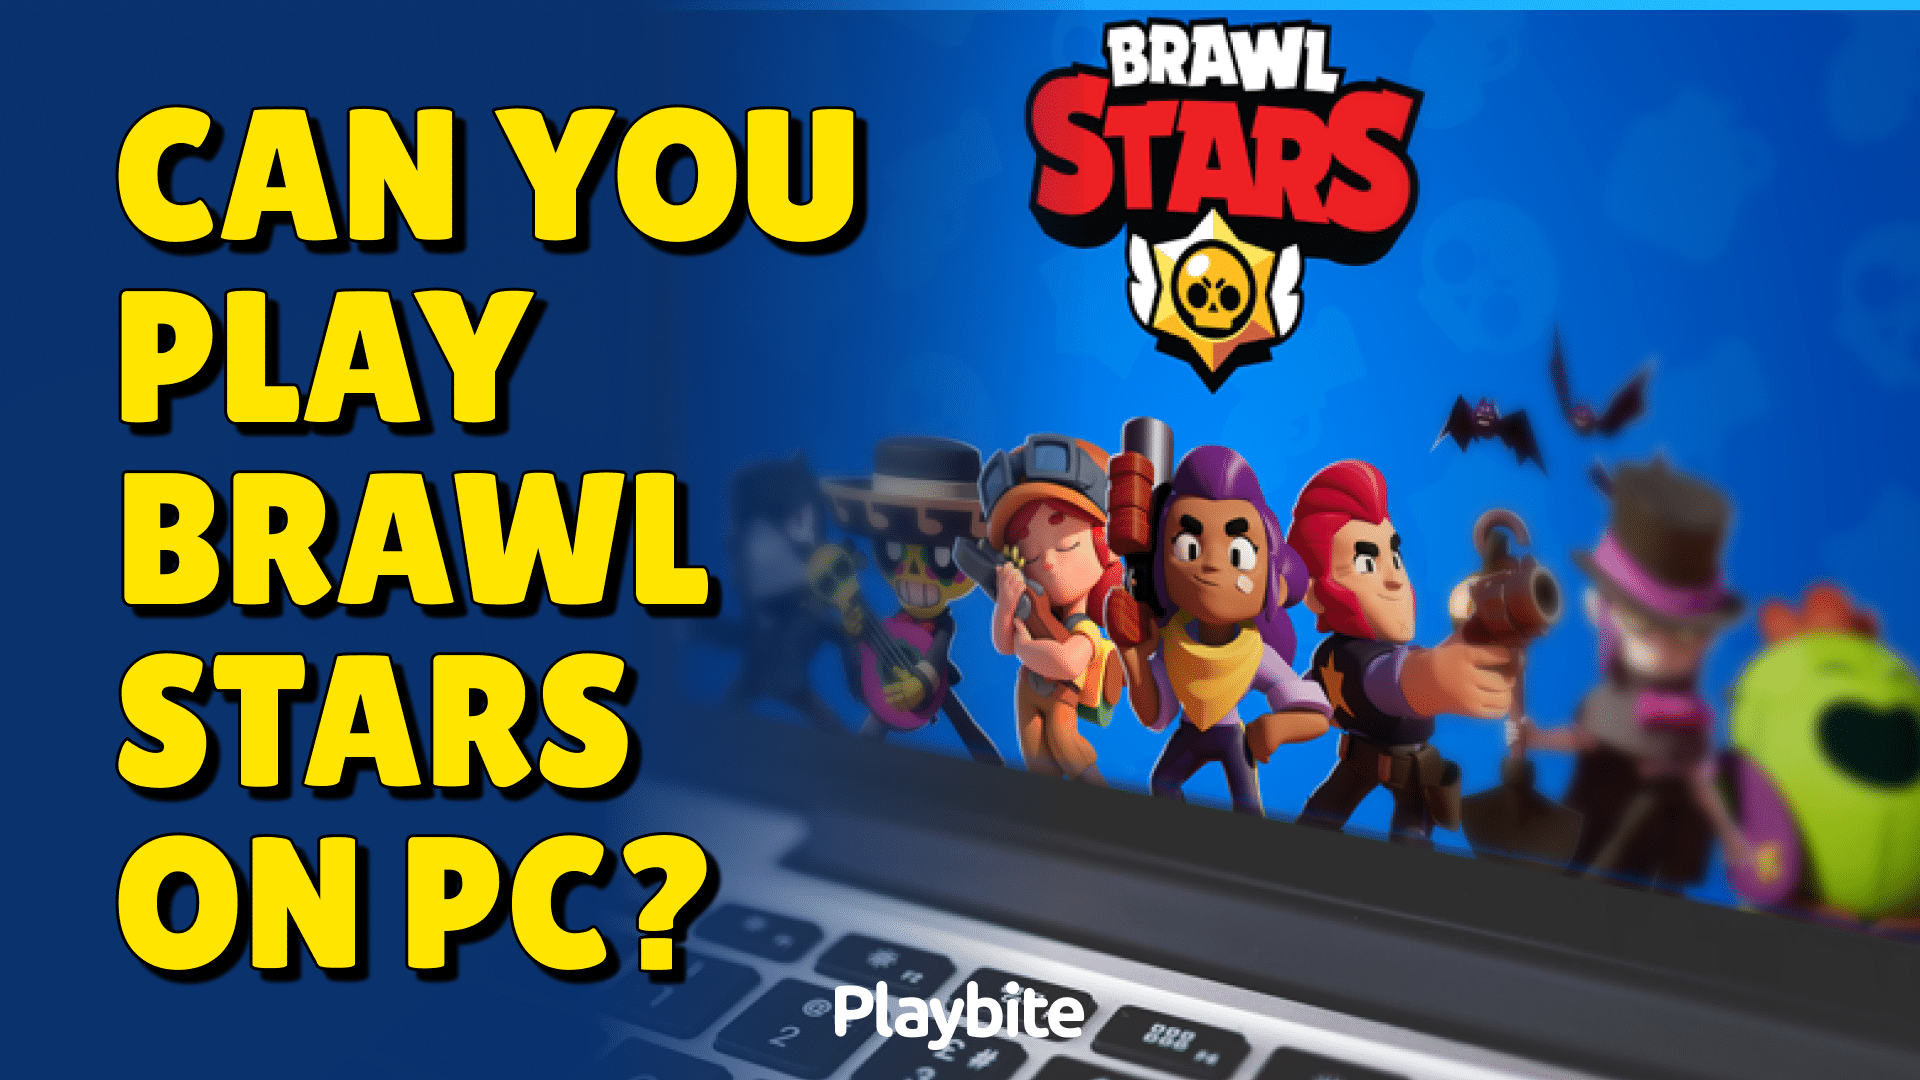 Can You Play Brawl Stars On PC?